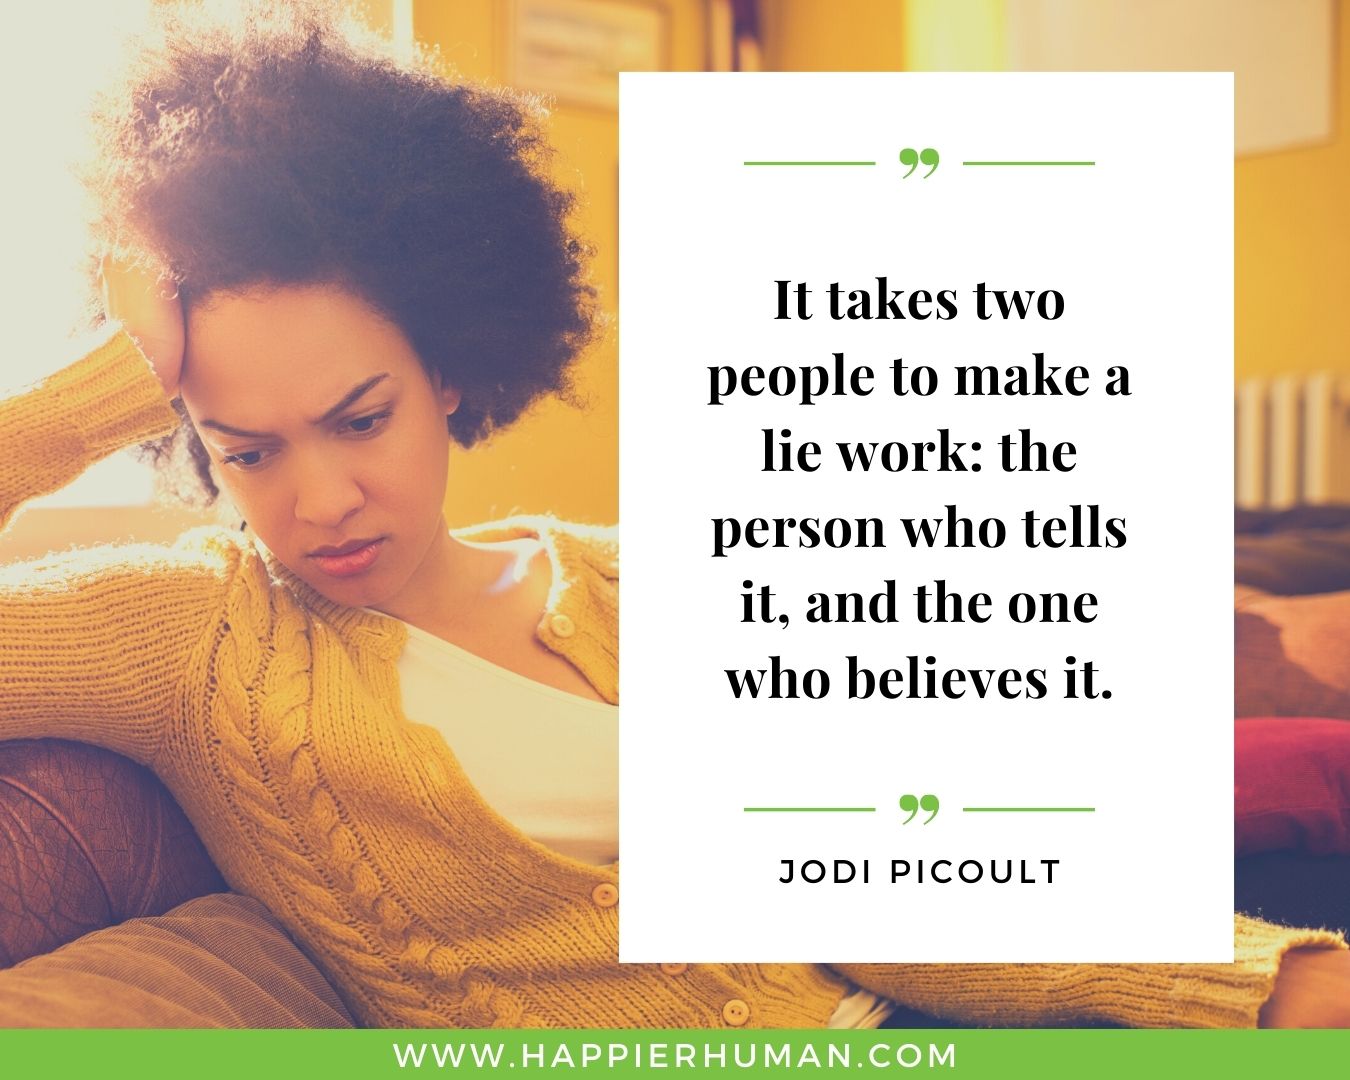 Broken Trust Quotes - “It takes two people to make a lie work: the person who tells it, and the one who believes it.” - Jodi Picoult